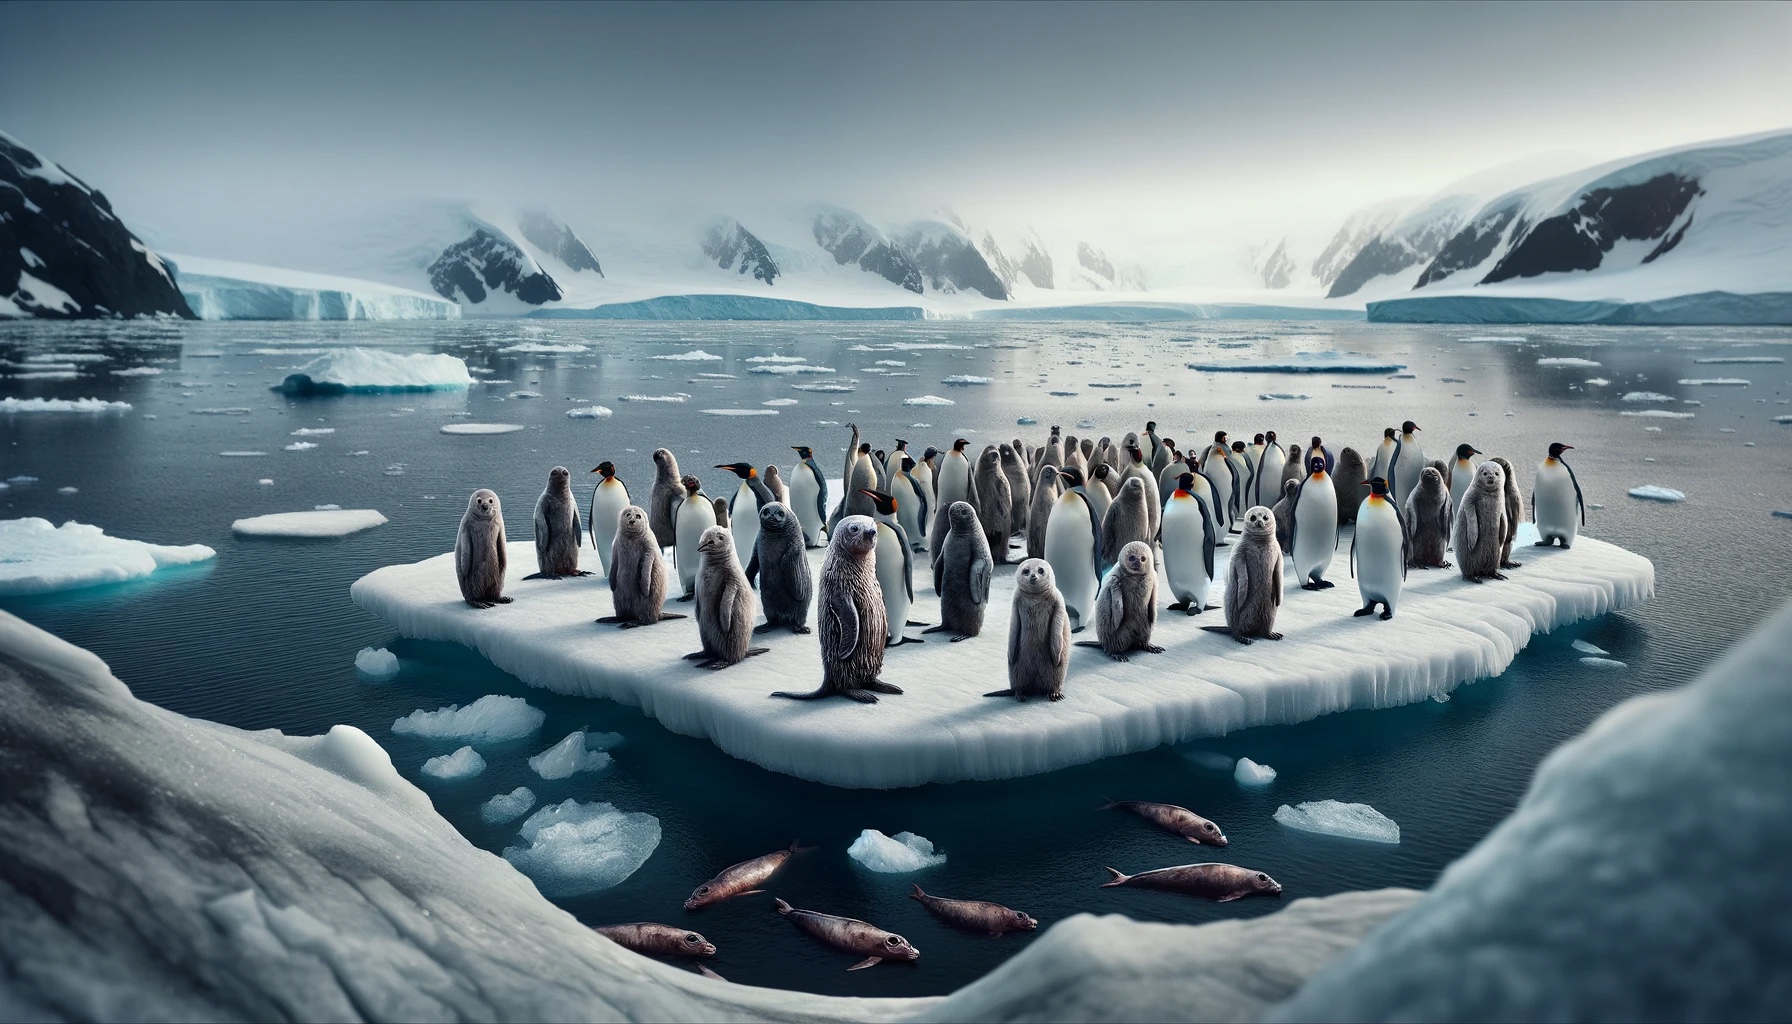 starving seals and penguins in the Antarctic due to overfishing krill